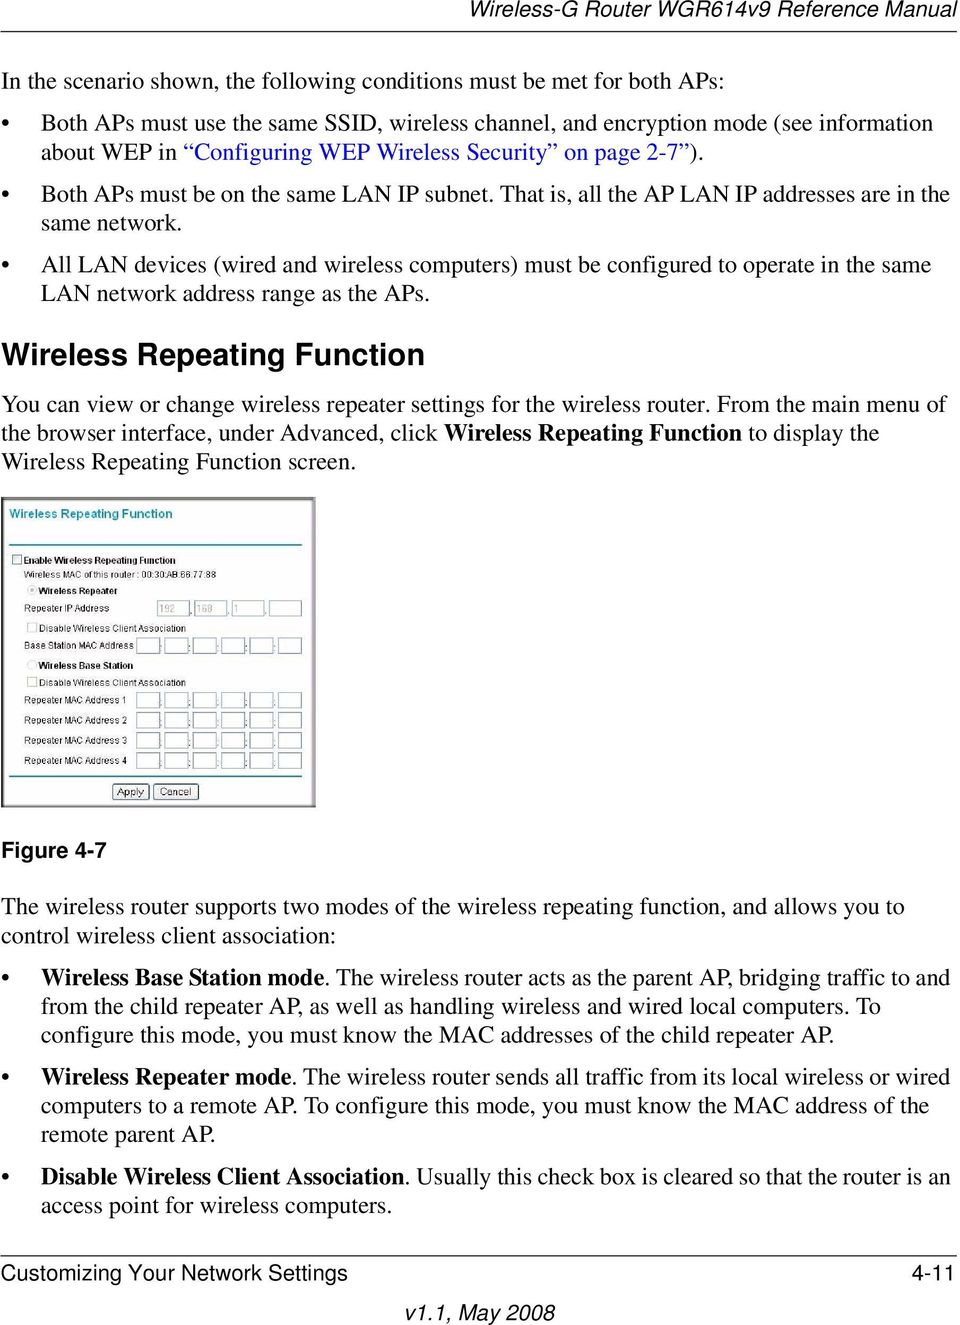 All LAN devices (wired and wireless computers) must be configured to operate in the same LAN network address range as the APs.